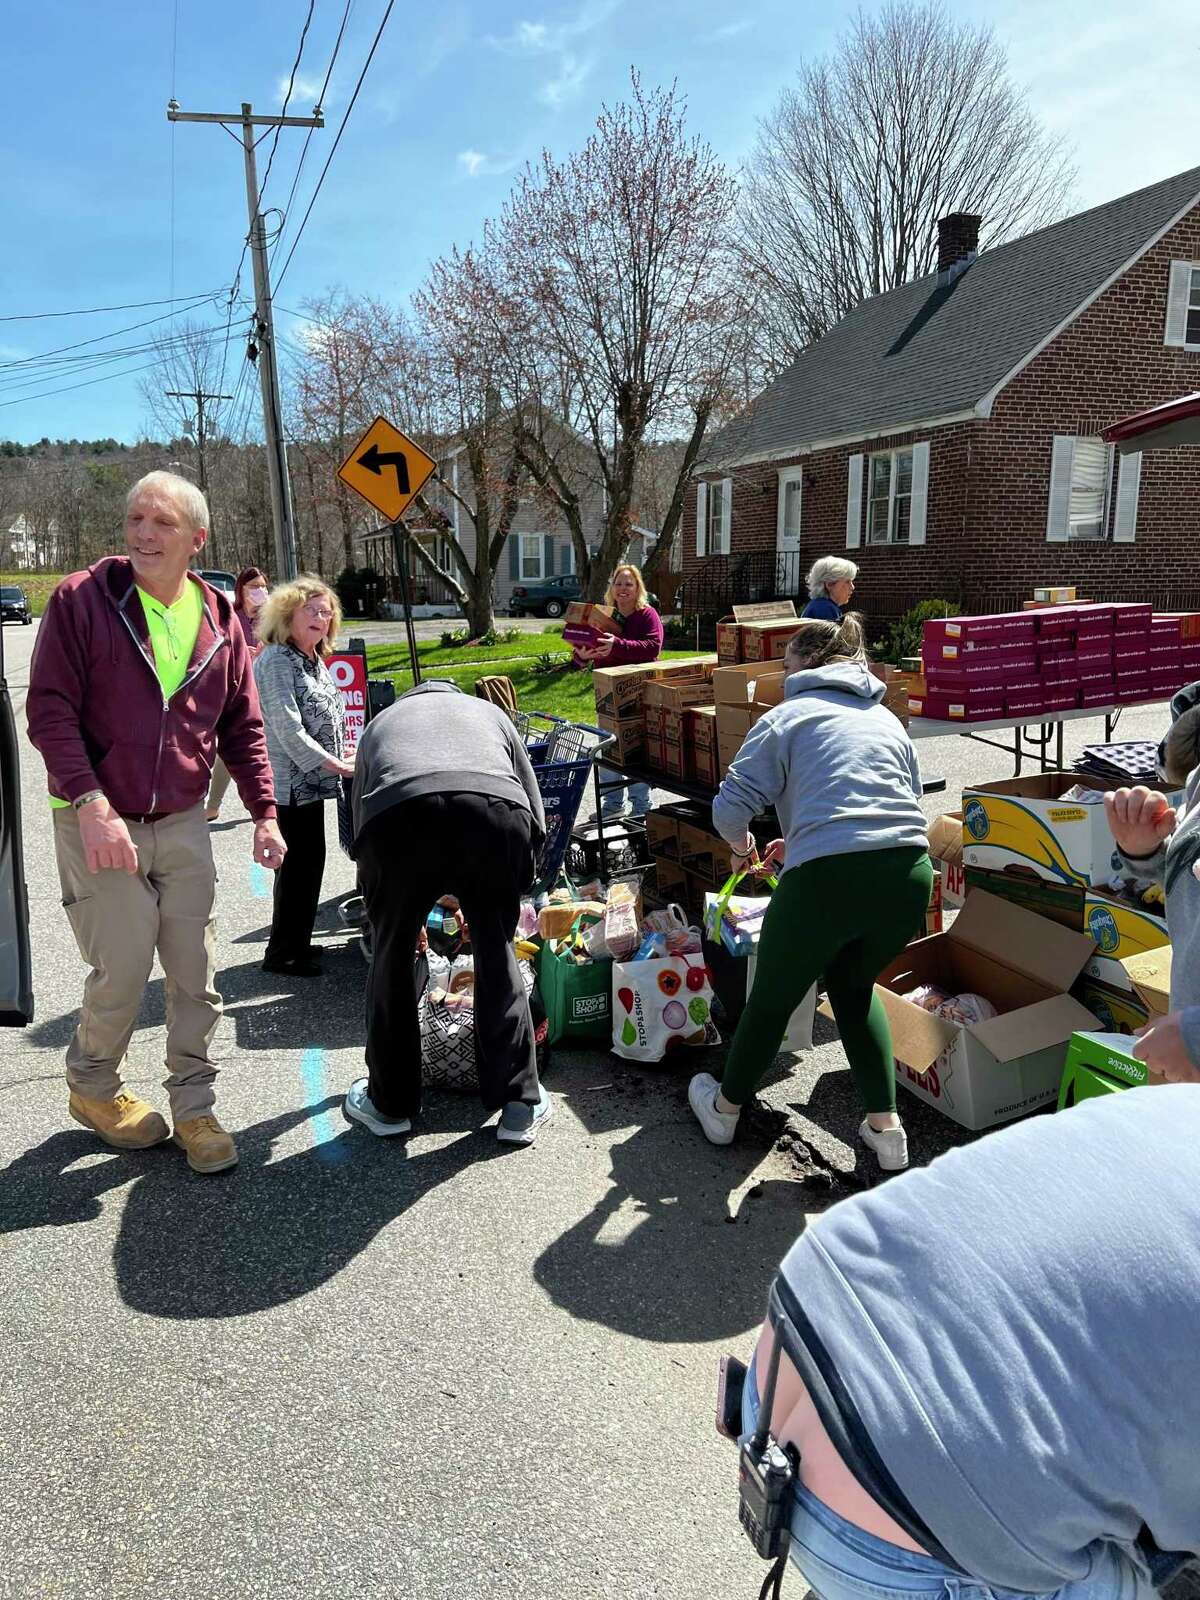 Friendly Hands Food Bank handed out free lunches families with chuildren in Torrington Public Schools Monday, while students are on spring break.